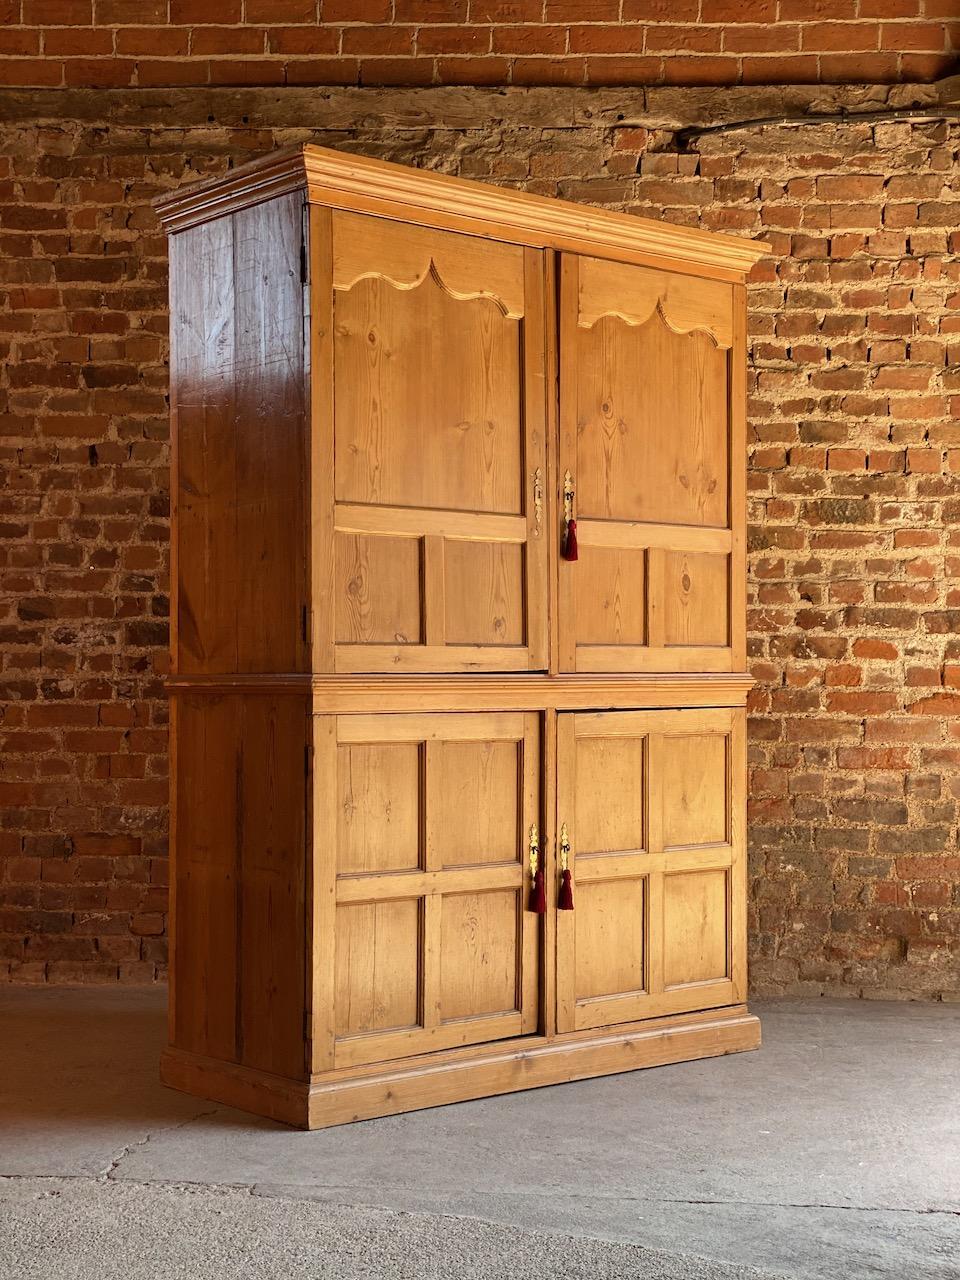 Antique pine wardrobe housekeepers cupboard 19th century Victorian circa 1890

Fabulous large antique pine wardrobe or housekeepers cupboard circa 1890, the corniced top above two panelled doors with one working lock, later added hanging rail to